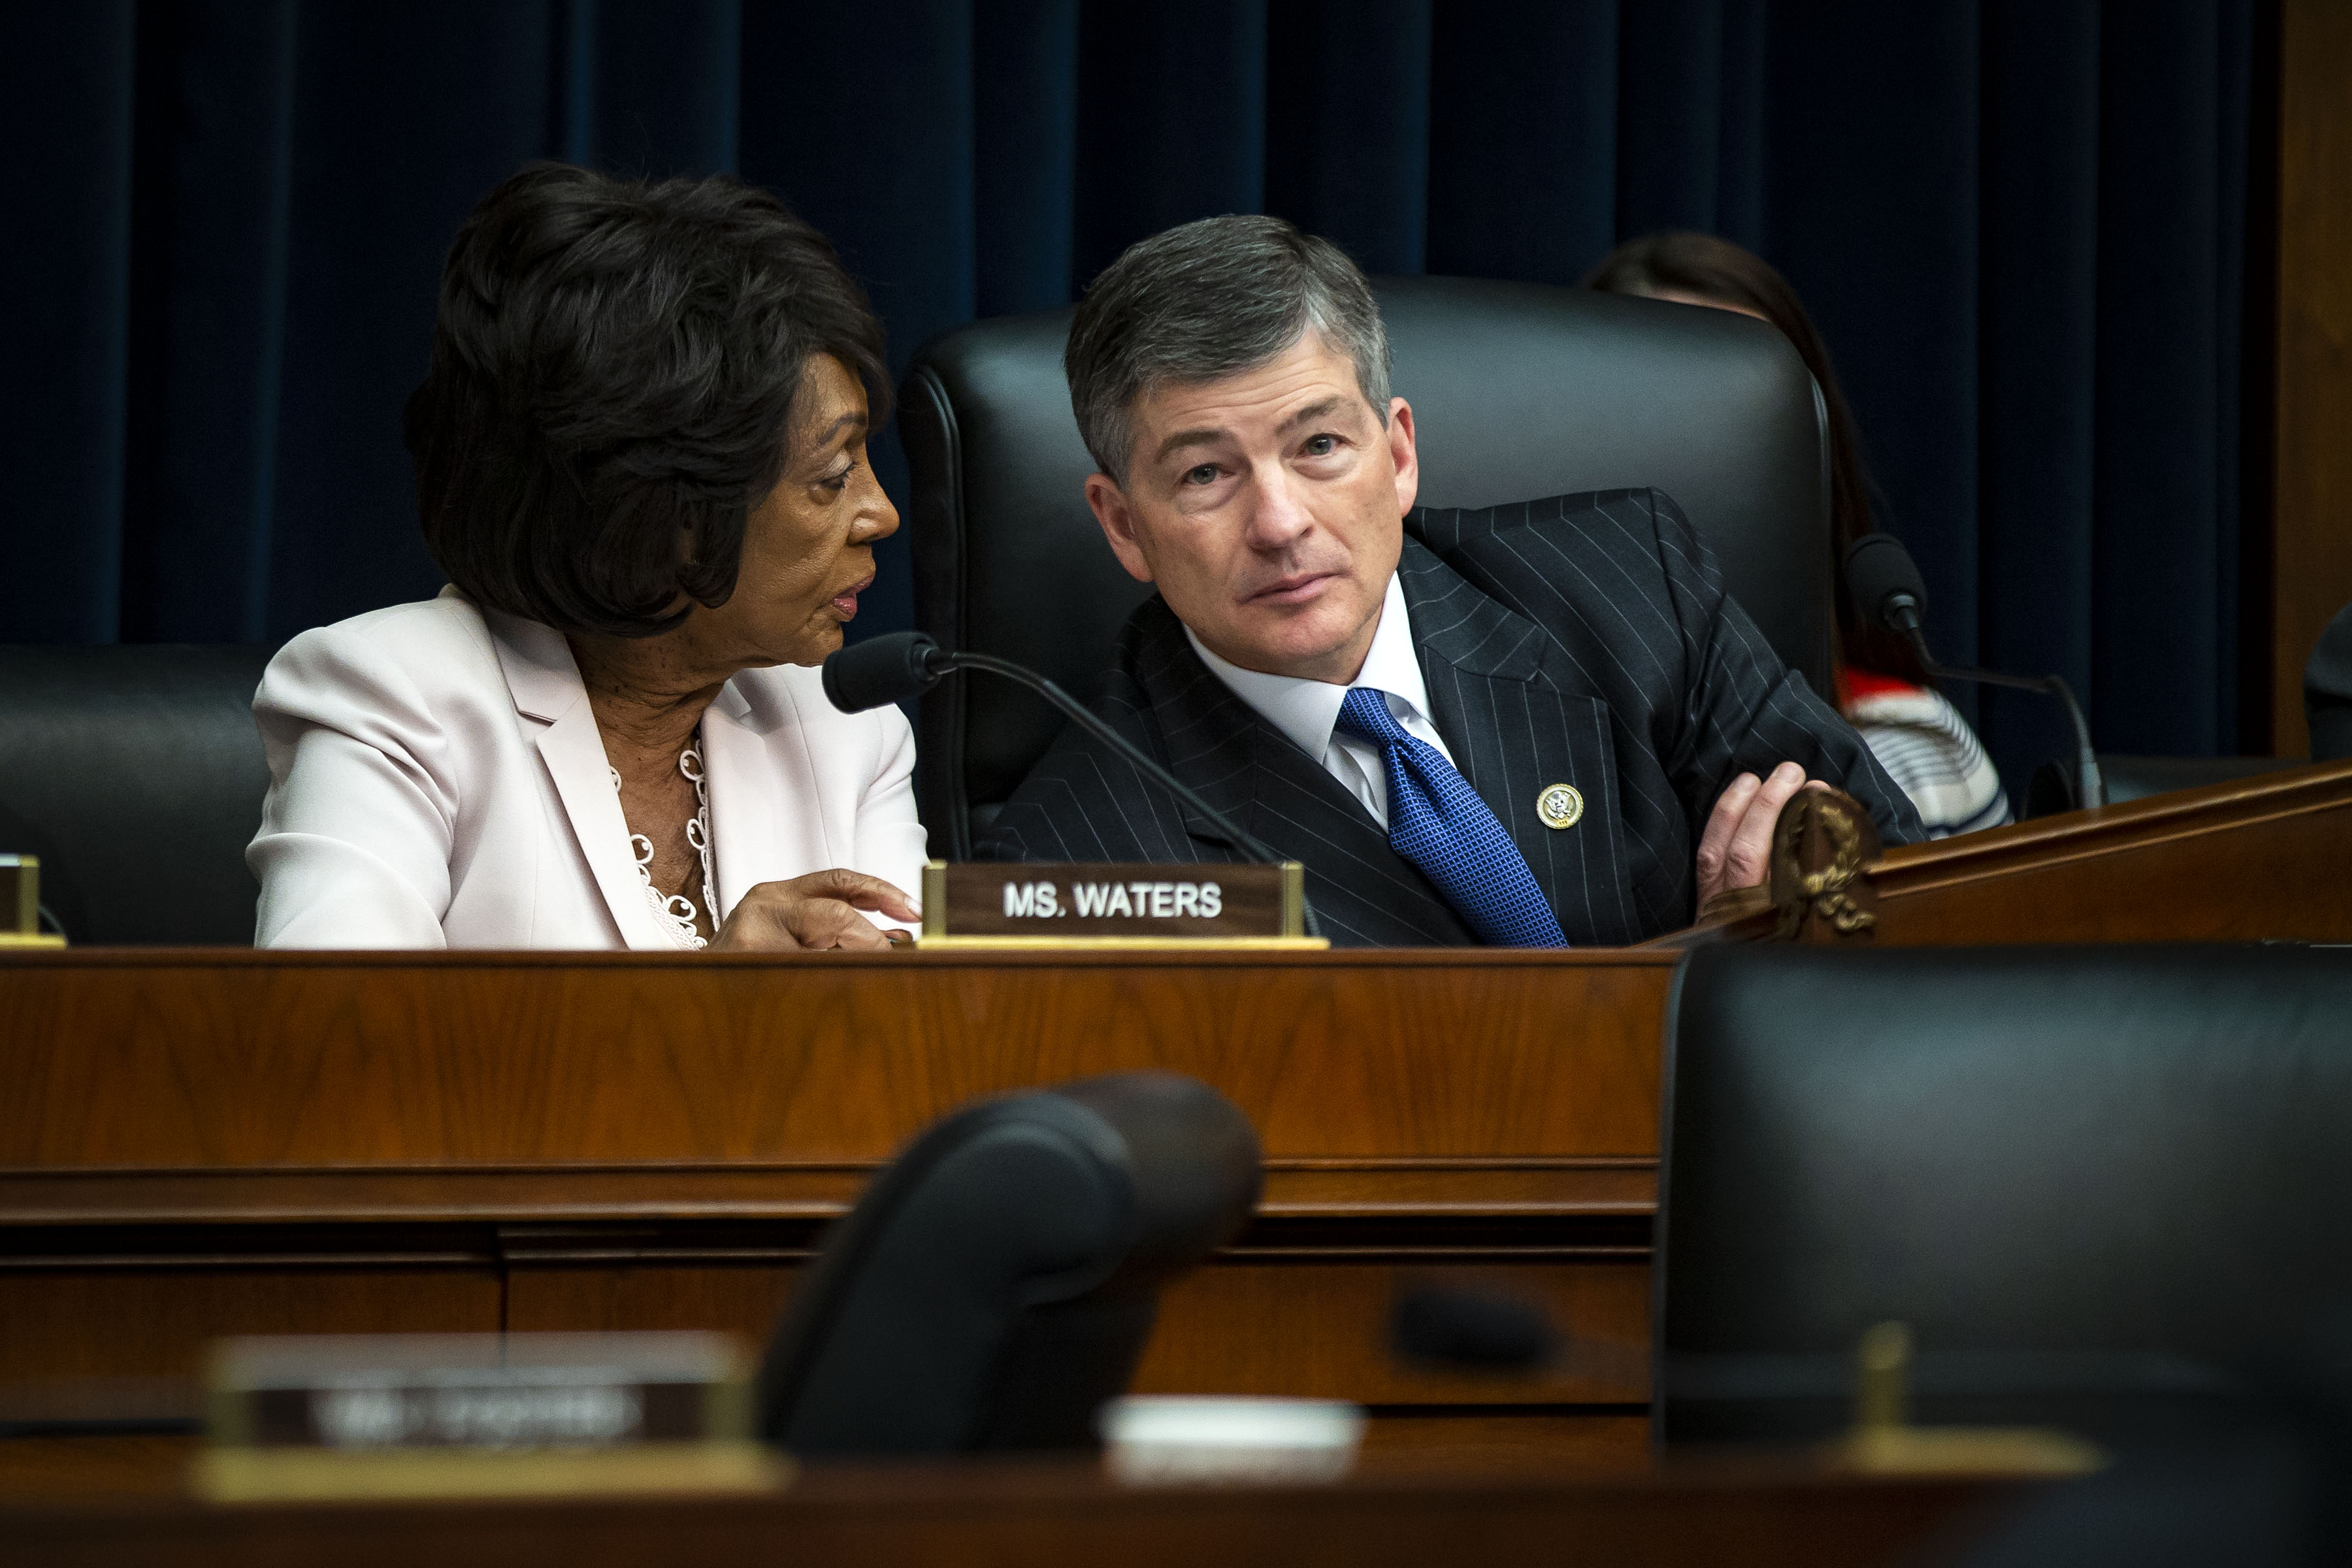 Maxine Waters and Jeb Hensarling